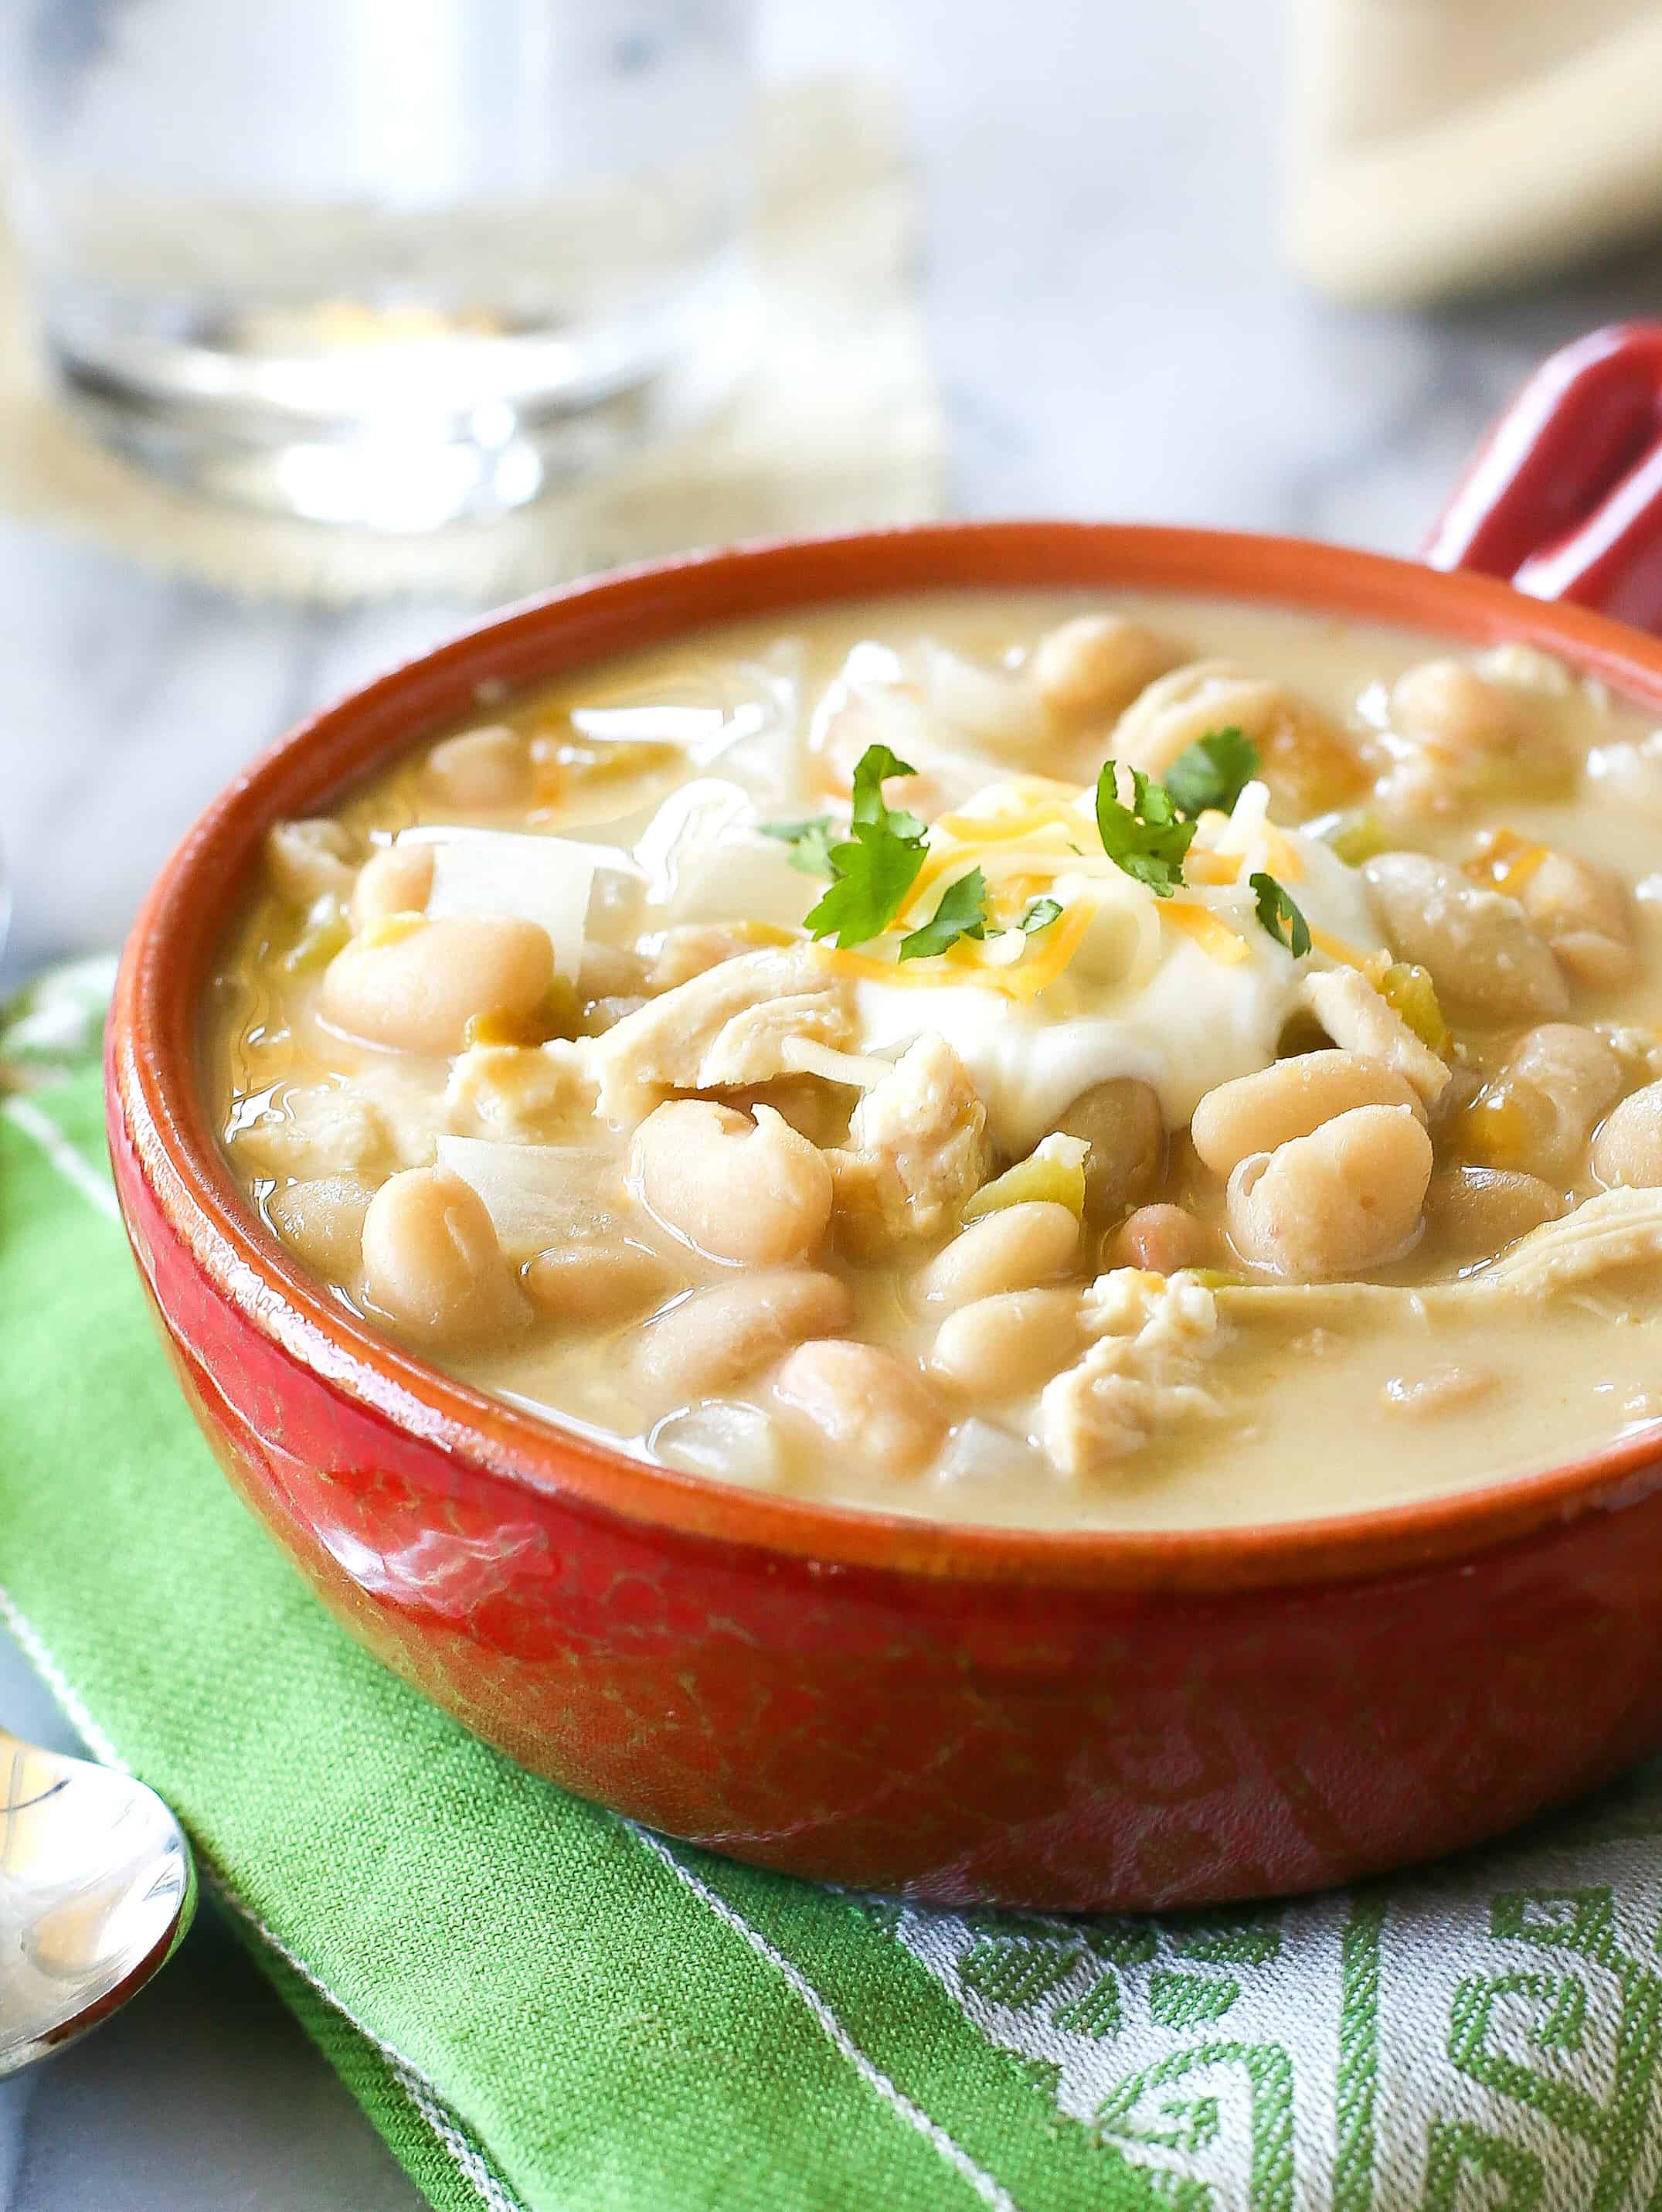 White Chicken Chili Recipe The Girl Who Ate Everything,How Long Are Britax Car Seats Good For